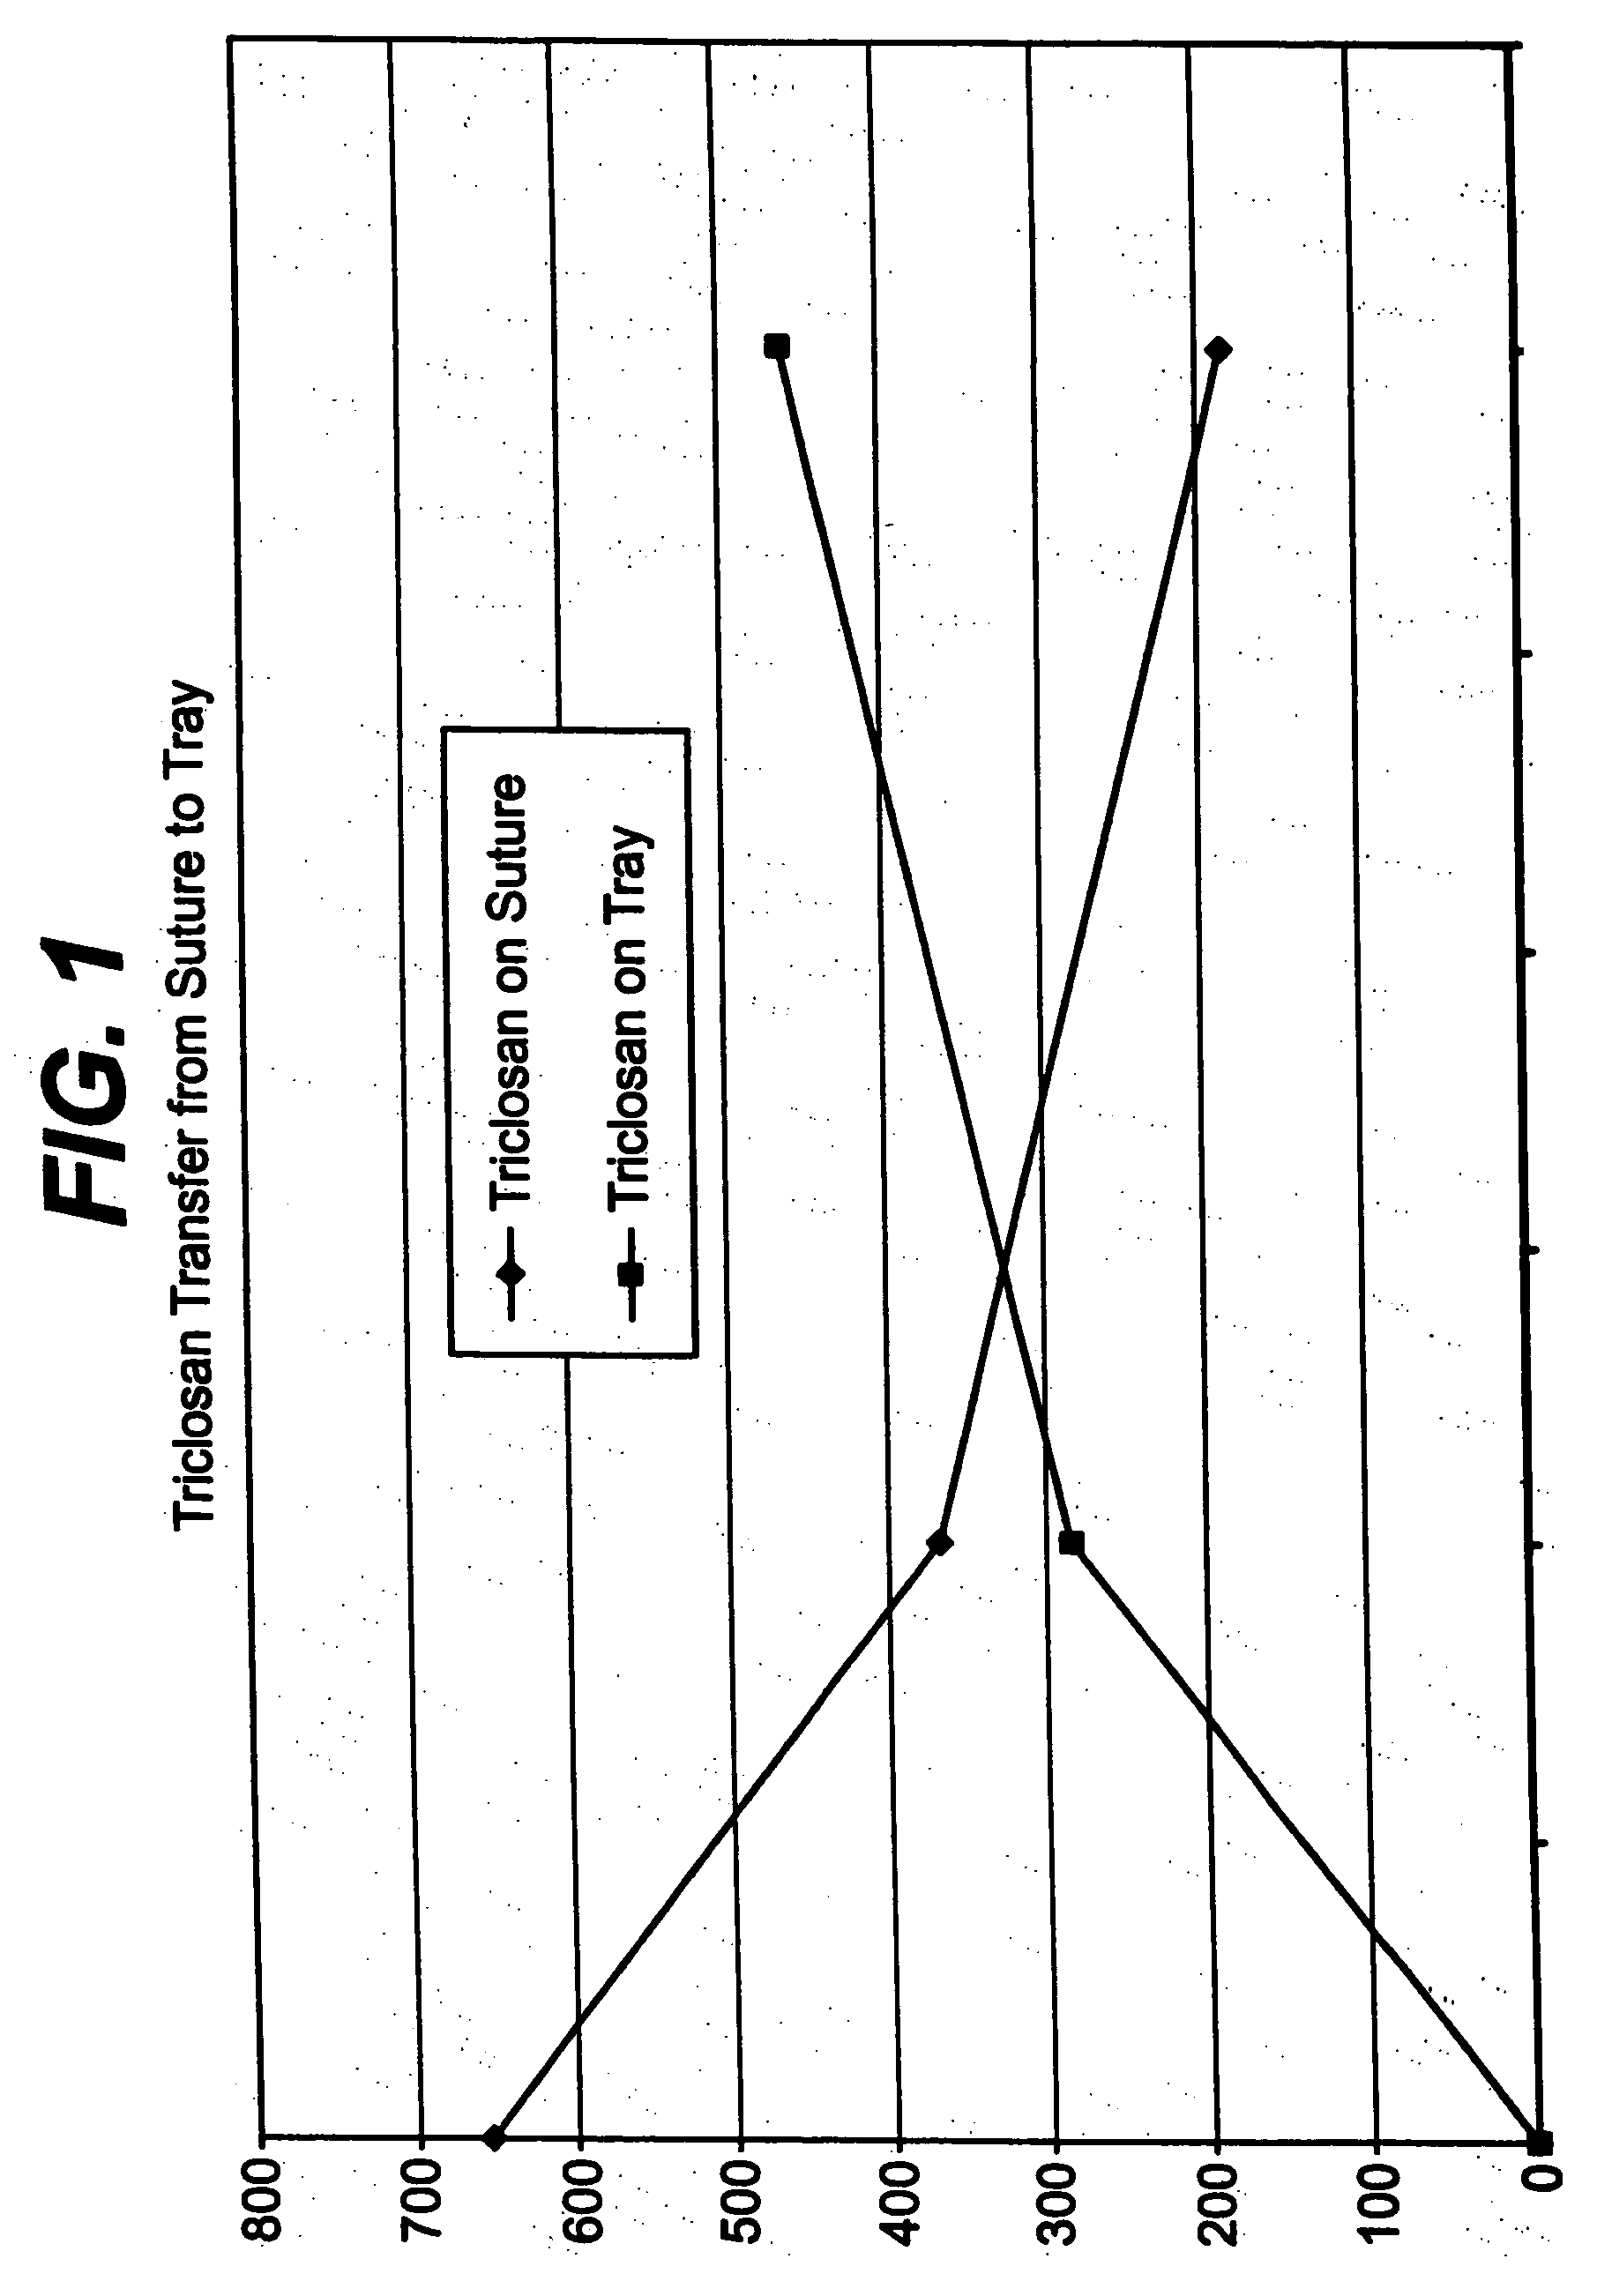 Method of preparing an antimicrobial packaged medical device